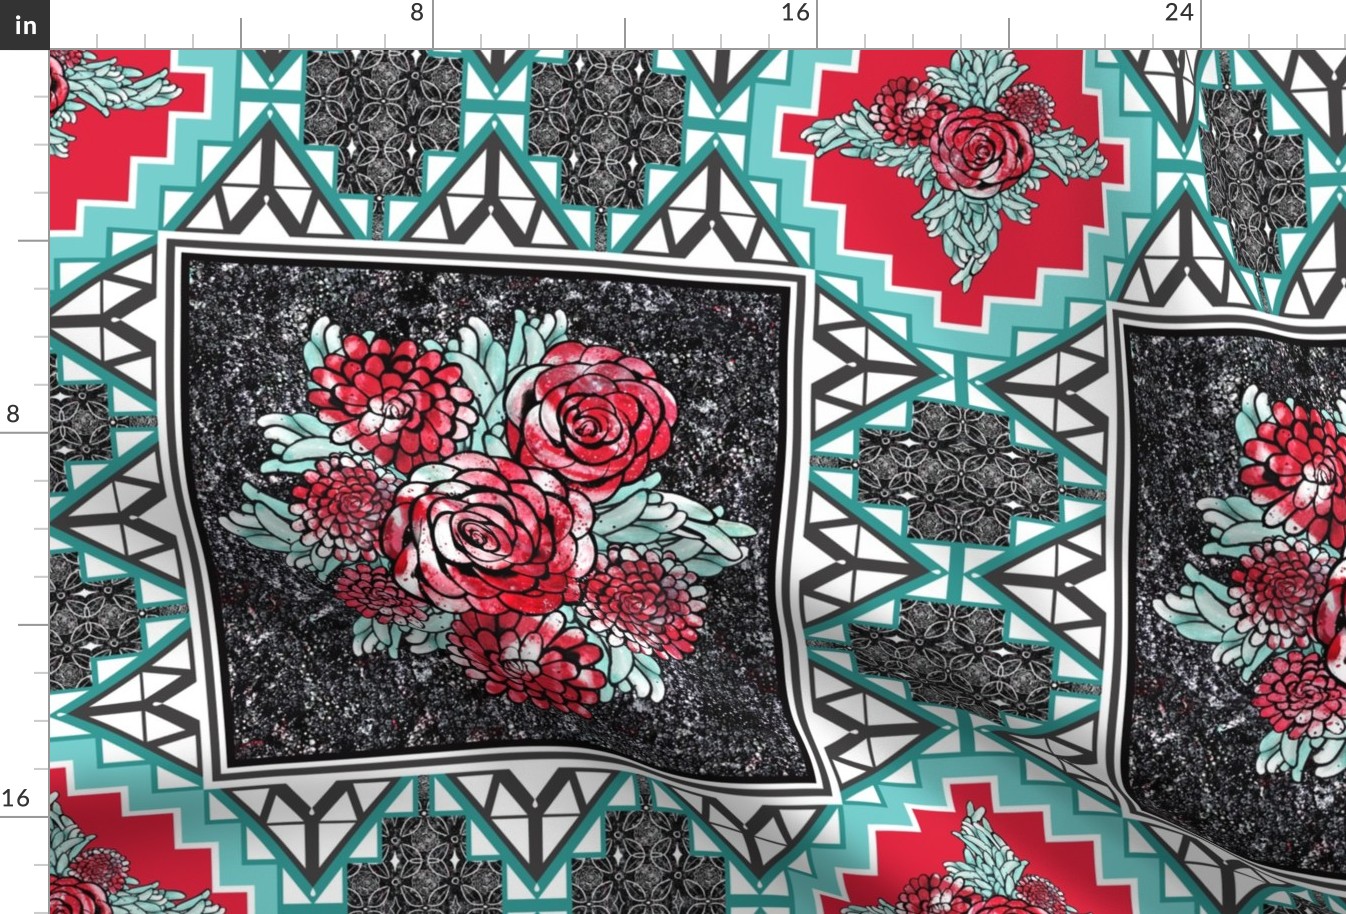 Red Rose Quilt Square Stone Inlay Tiles for Wholecloth Quilt 